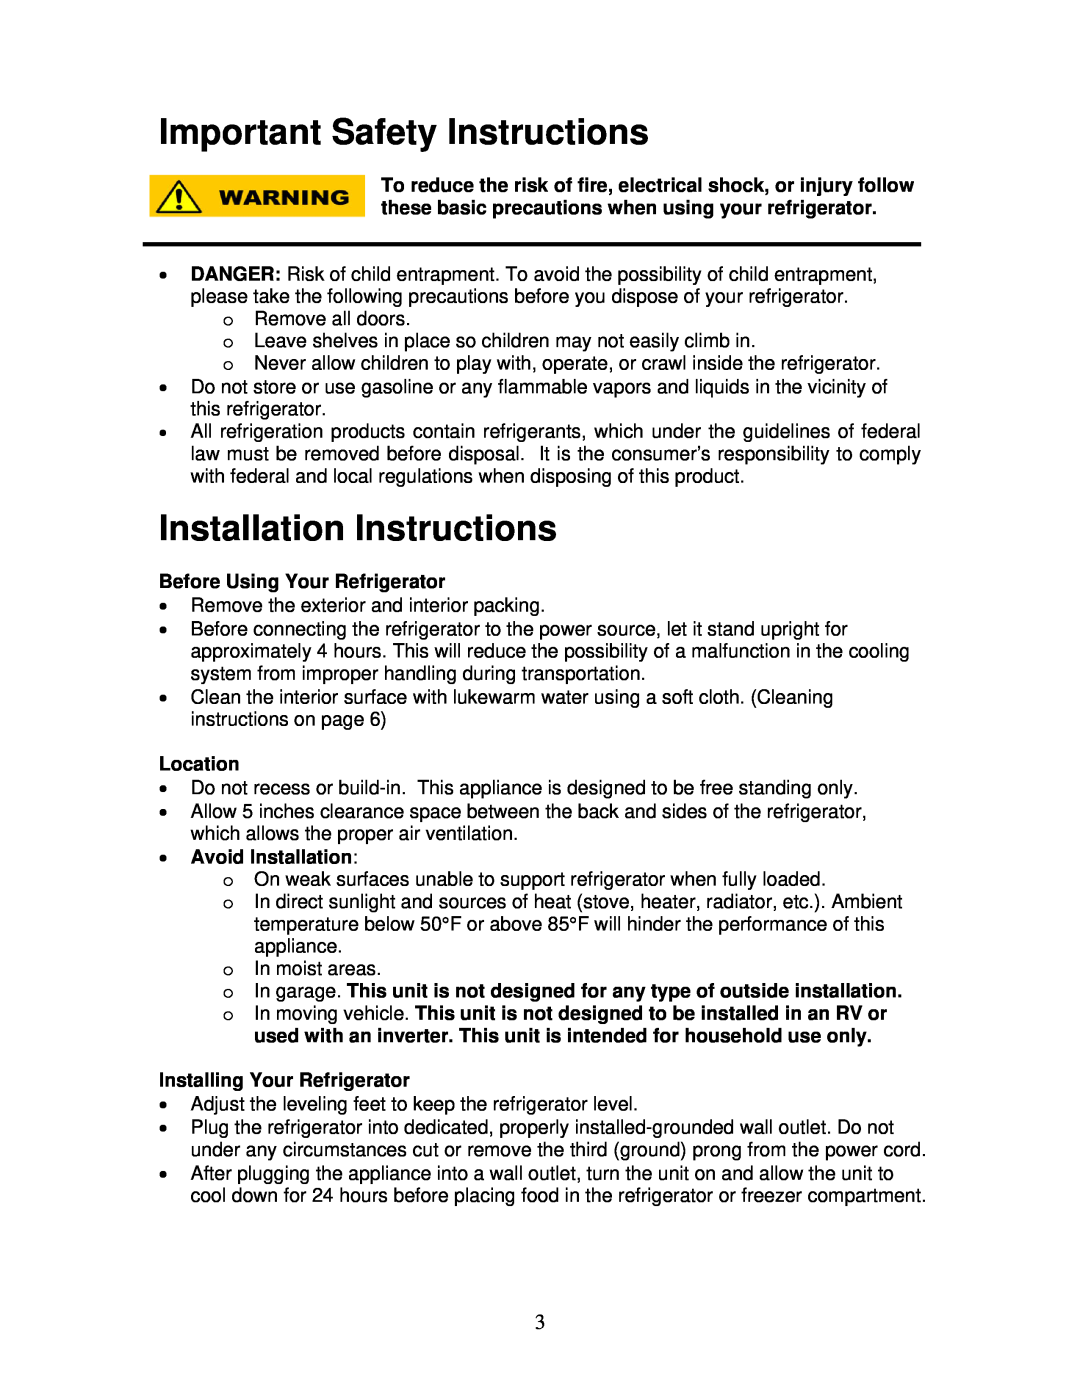 Magic Chef MCBR1020W Important Safety Instructions, Installation Instructions, Before Using Your Refrigerator, Location 